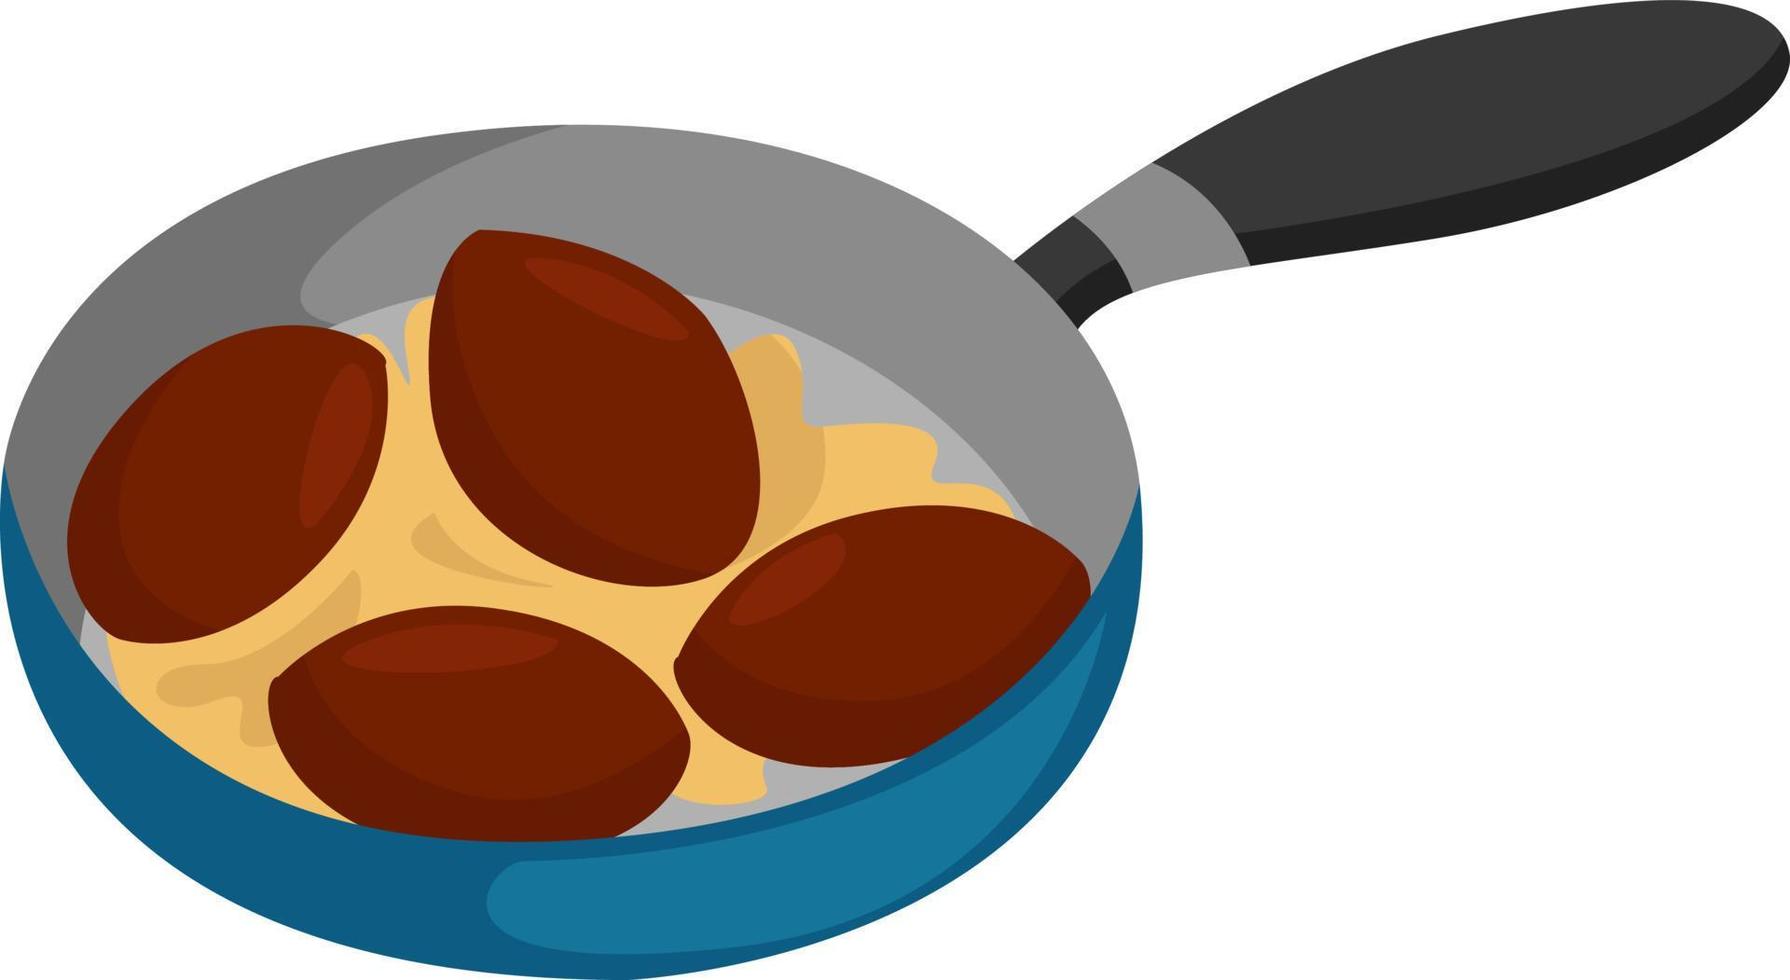 Frying pan, illustration, vector on a white background.